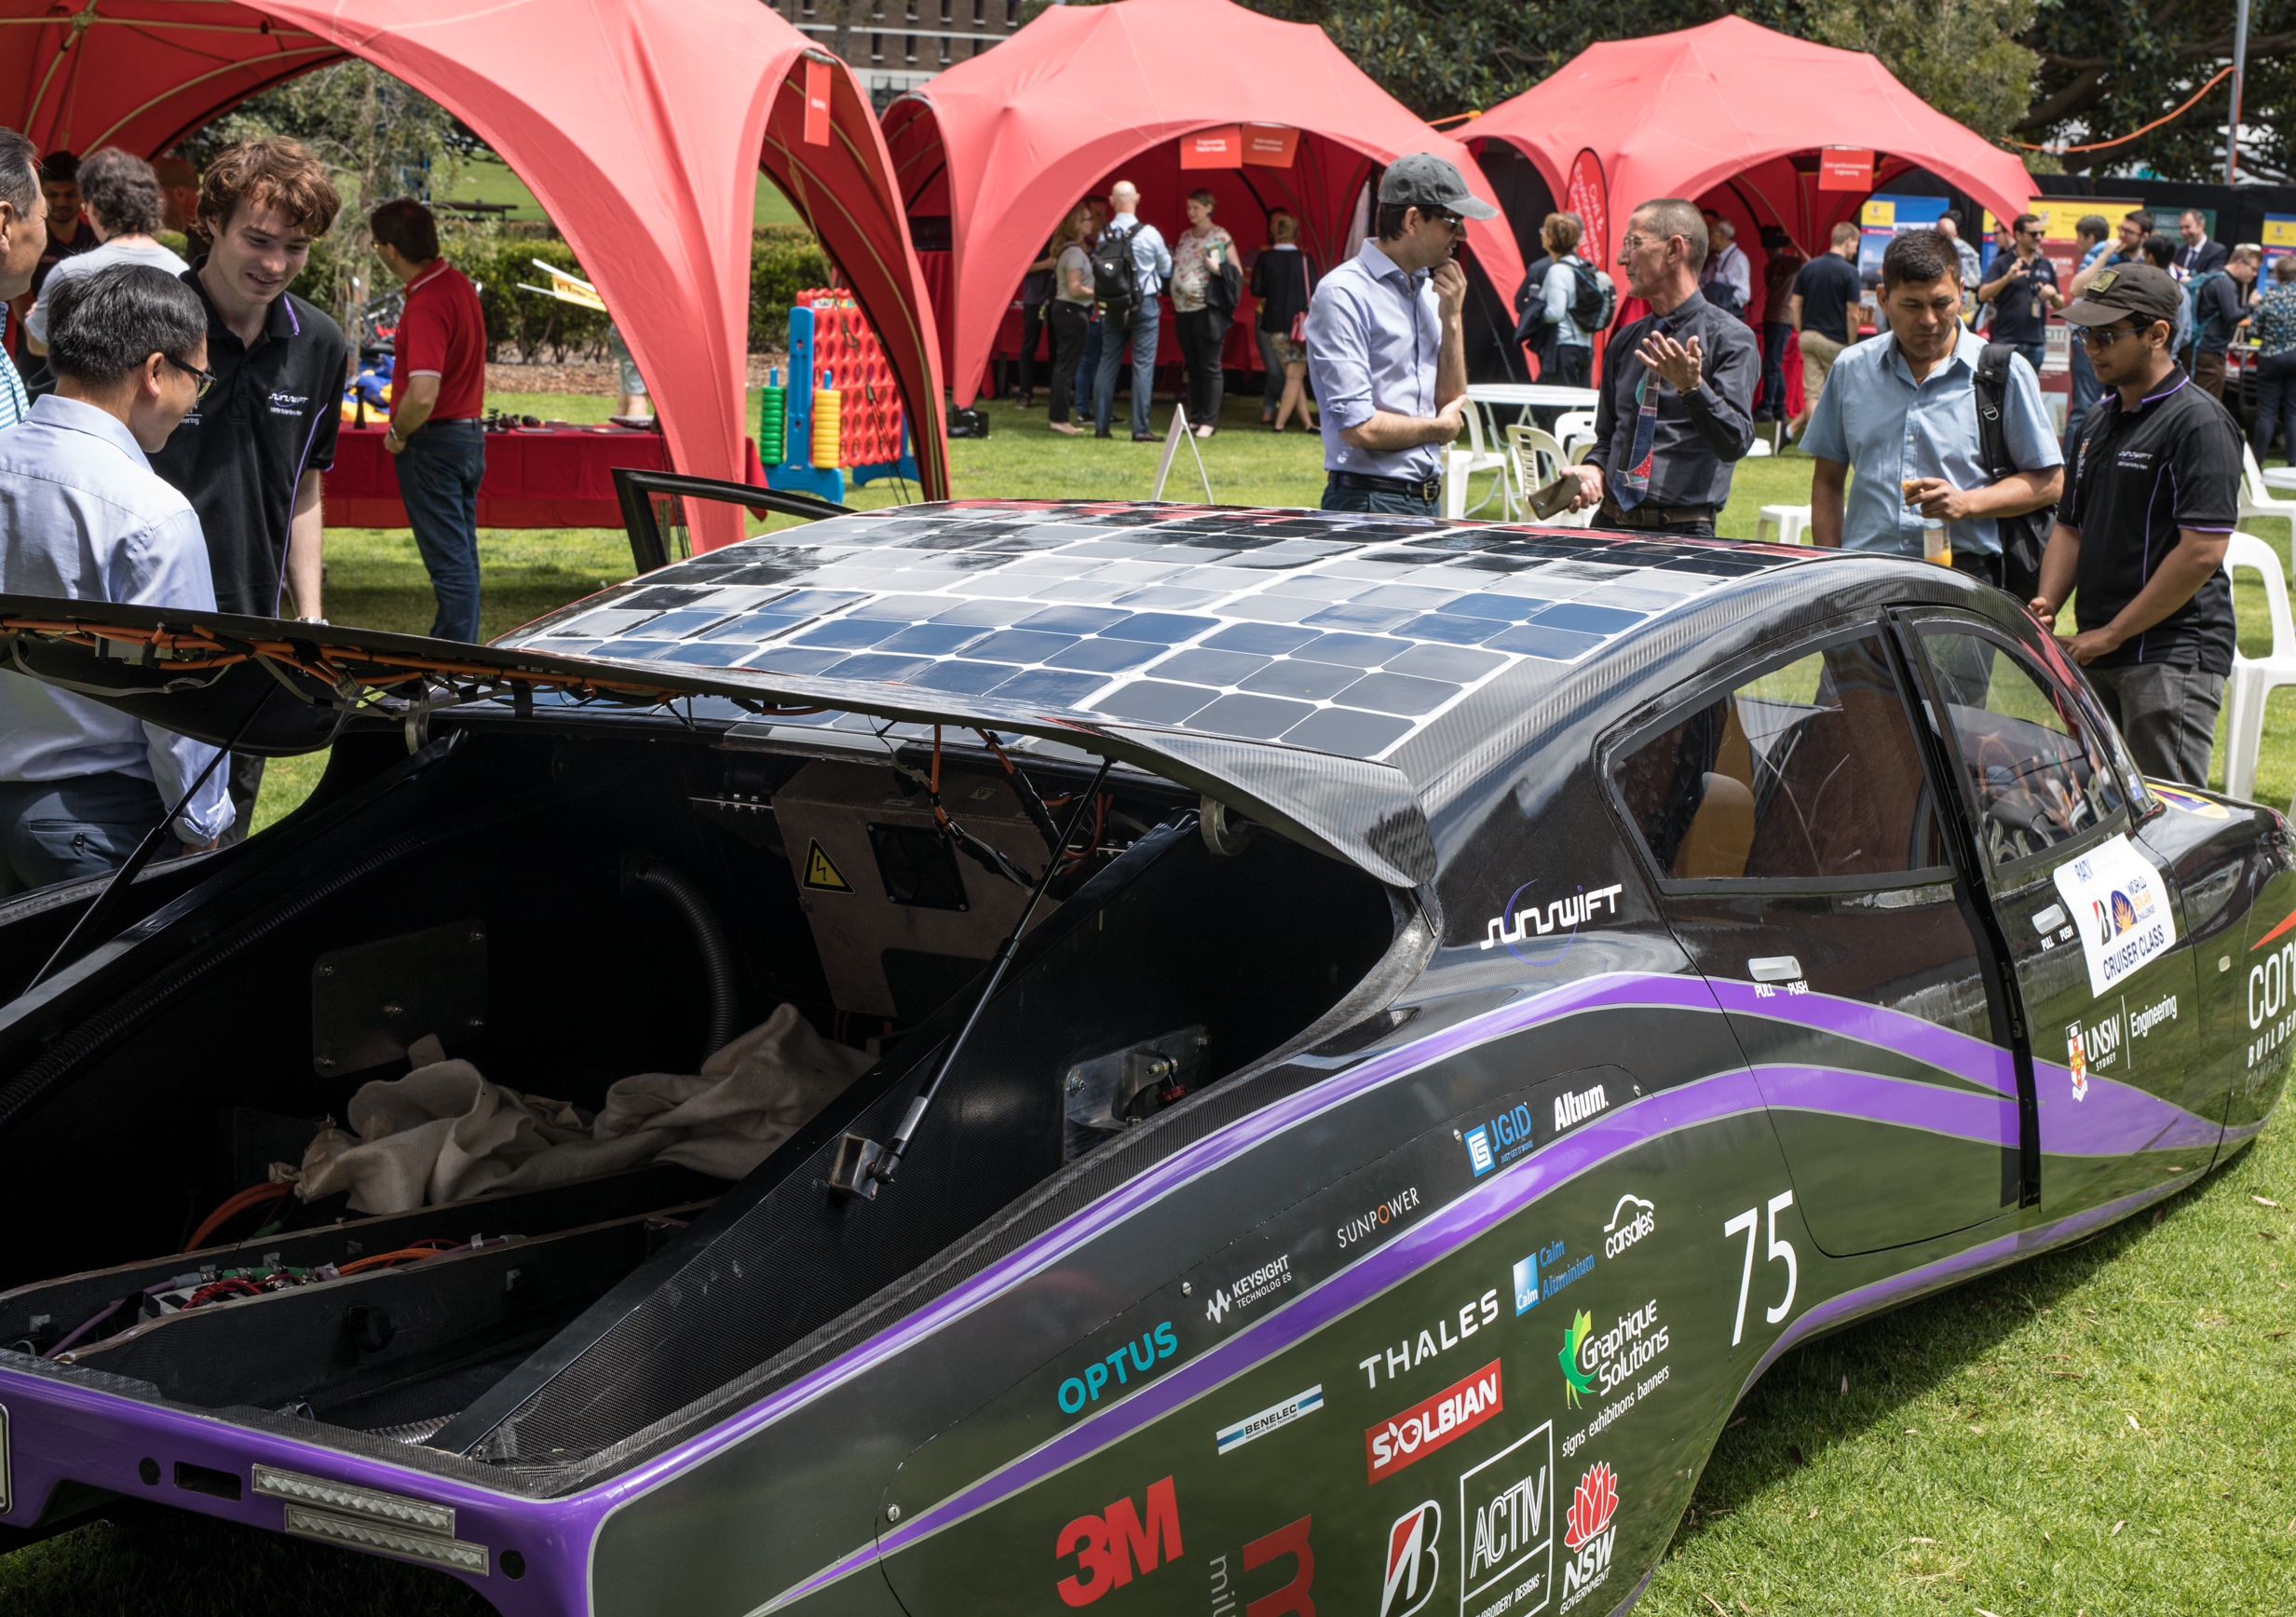 The Sunswift team shows off its latest solar car. Photo: UNSW Engineering